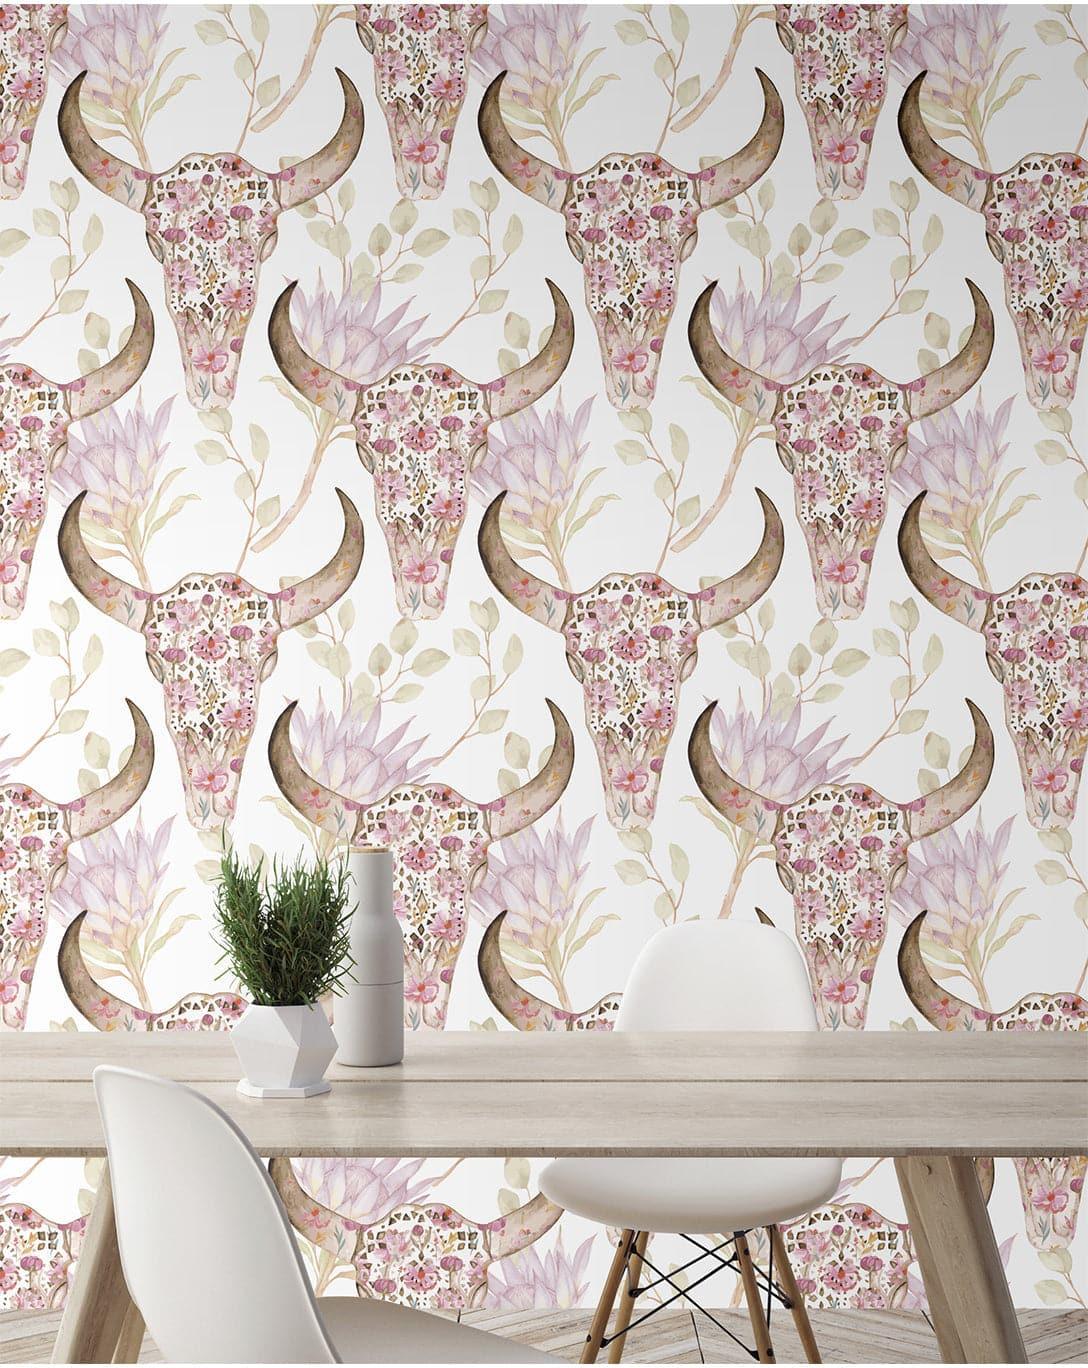 Protea Flowers With Skulls Removable Wallpaper 